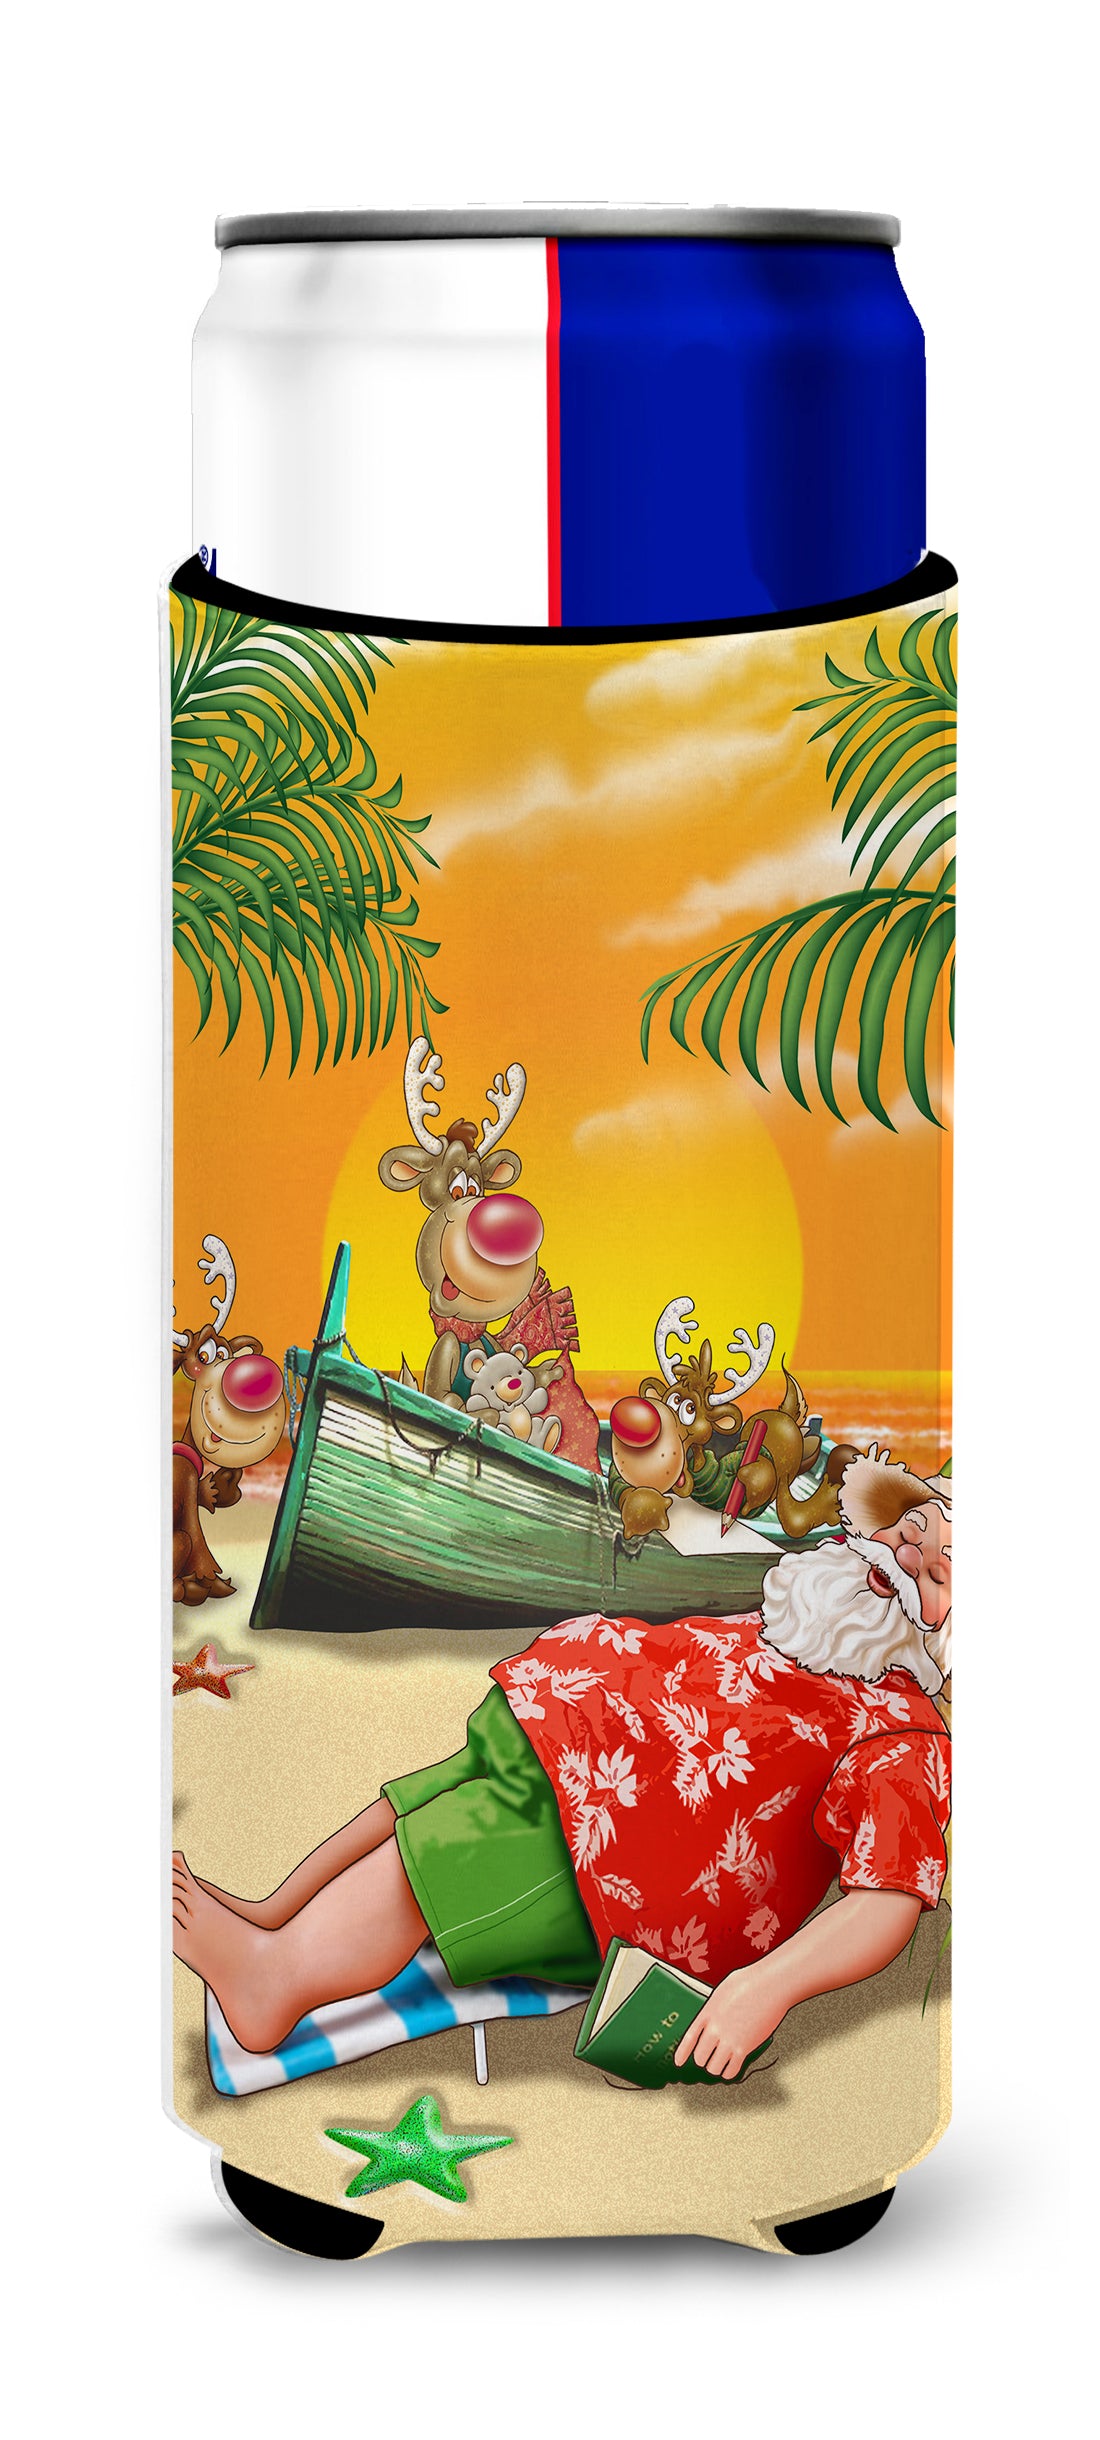 Beach Christmas Santa Claus Napping Ultra Beverage Insulators for slim cans APH5149MUK